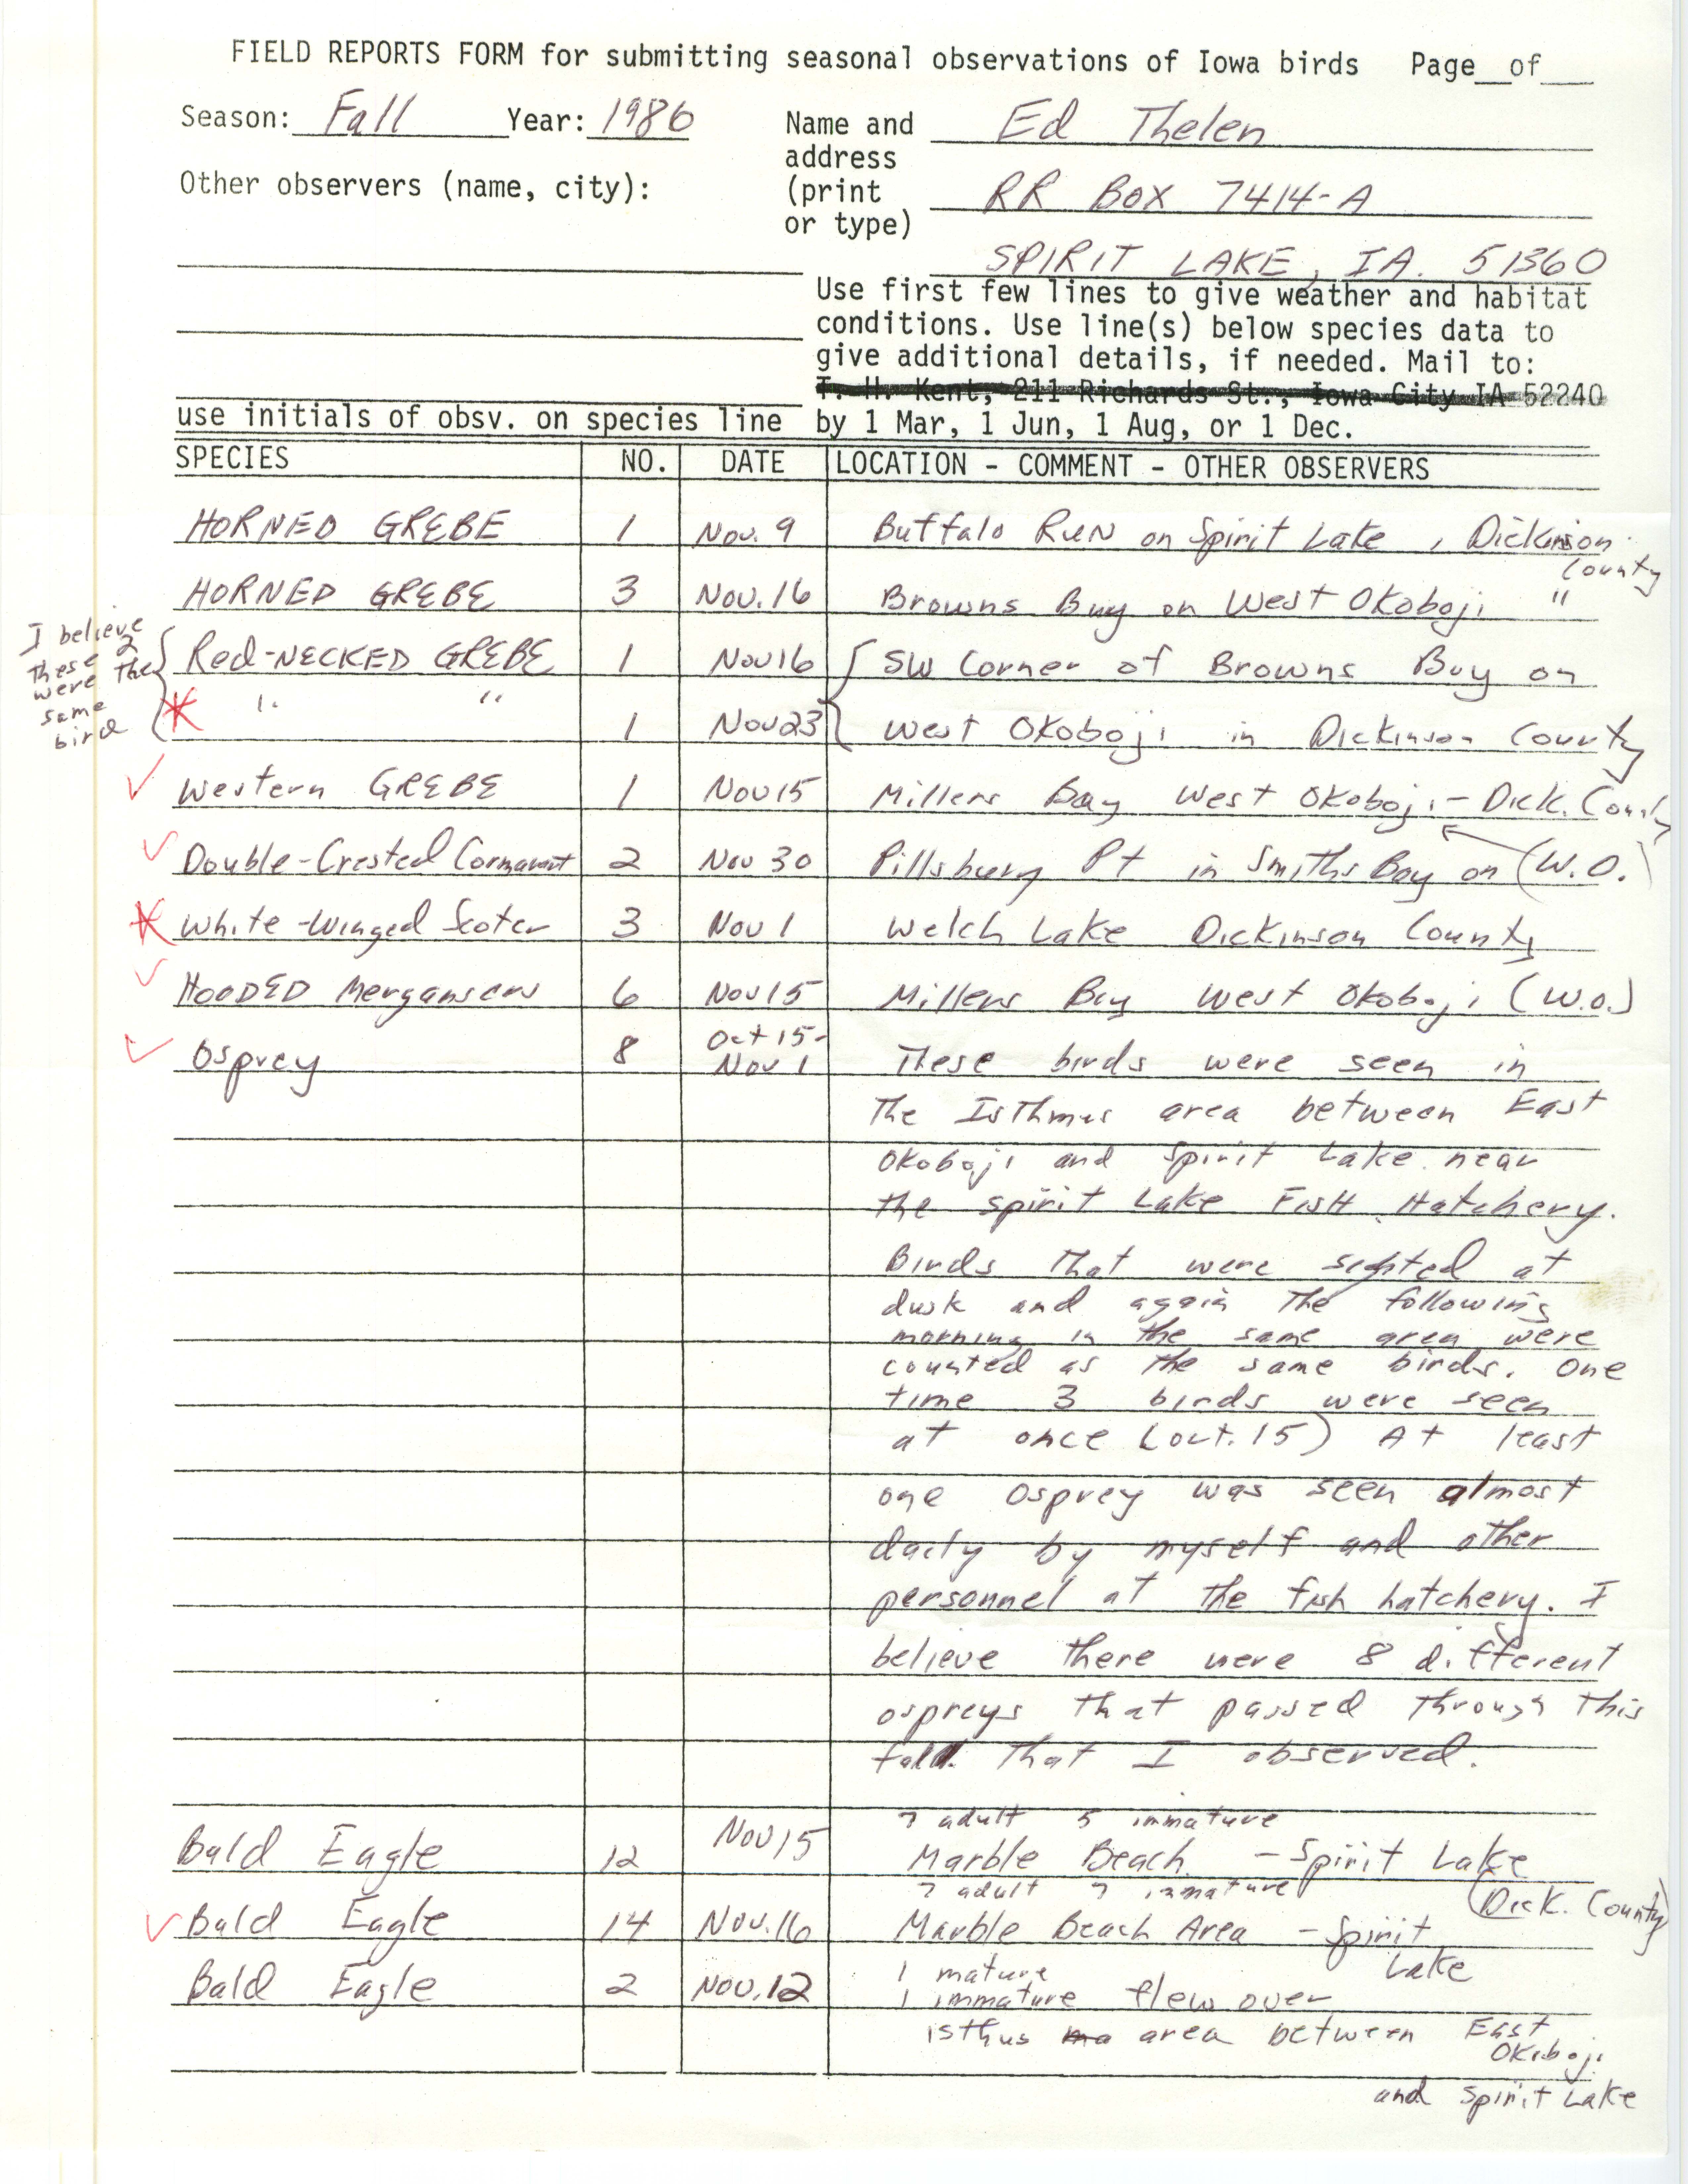 Field reports form for submitting seasonal observations of Iowa birds, Ed Thelen, fall 1986